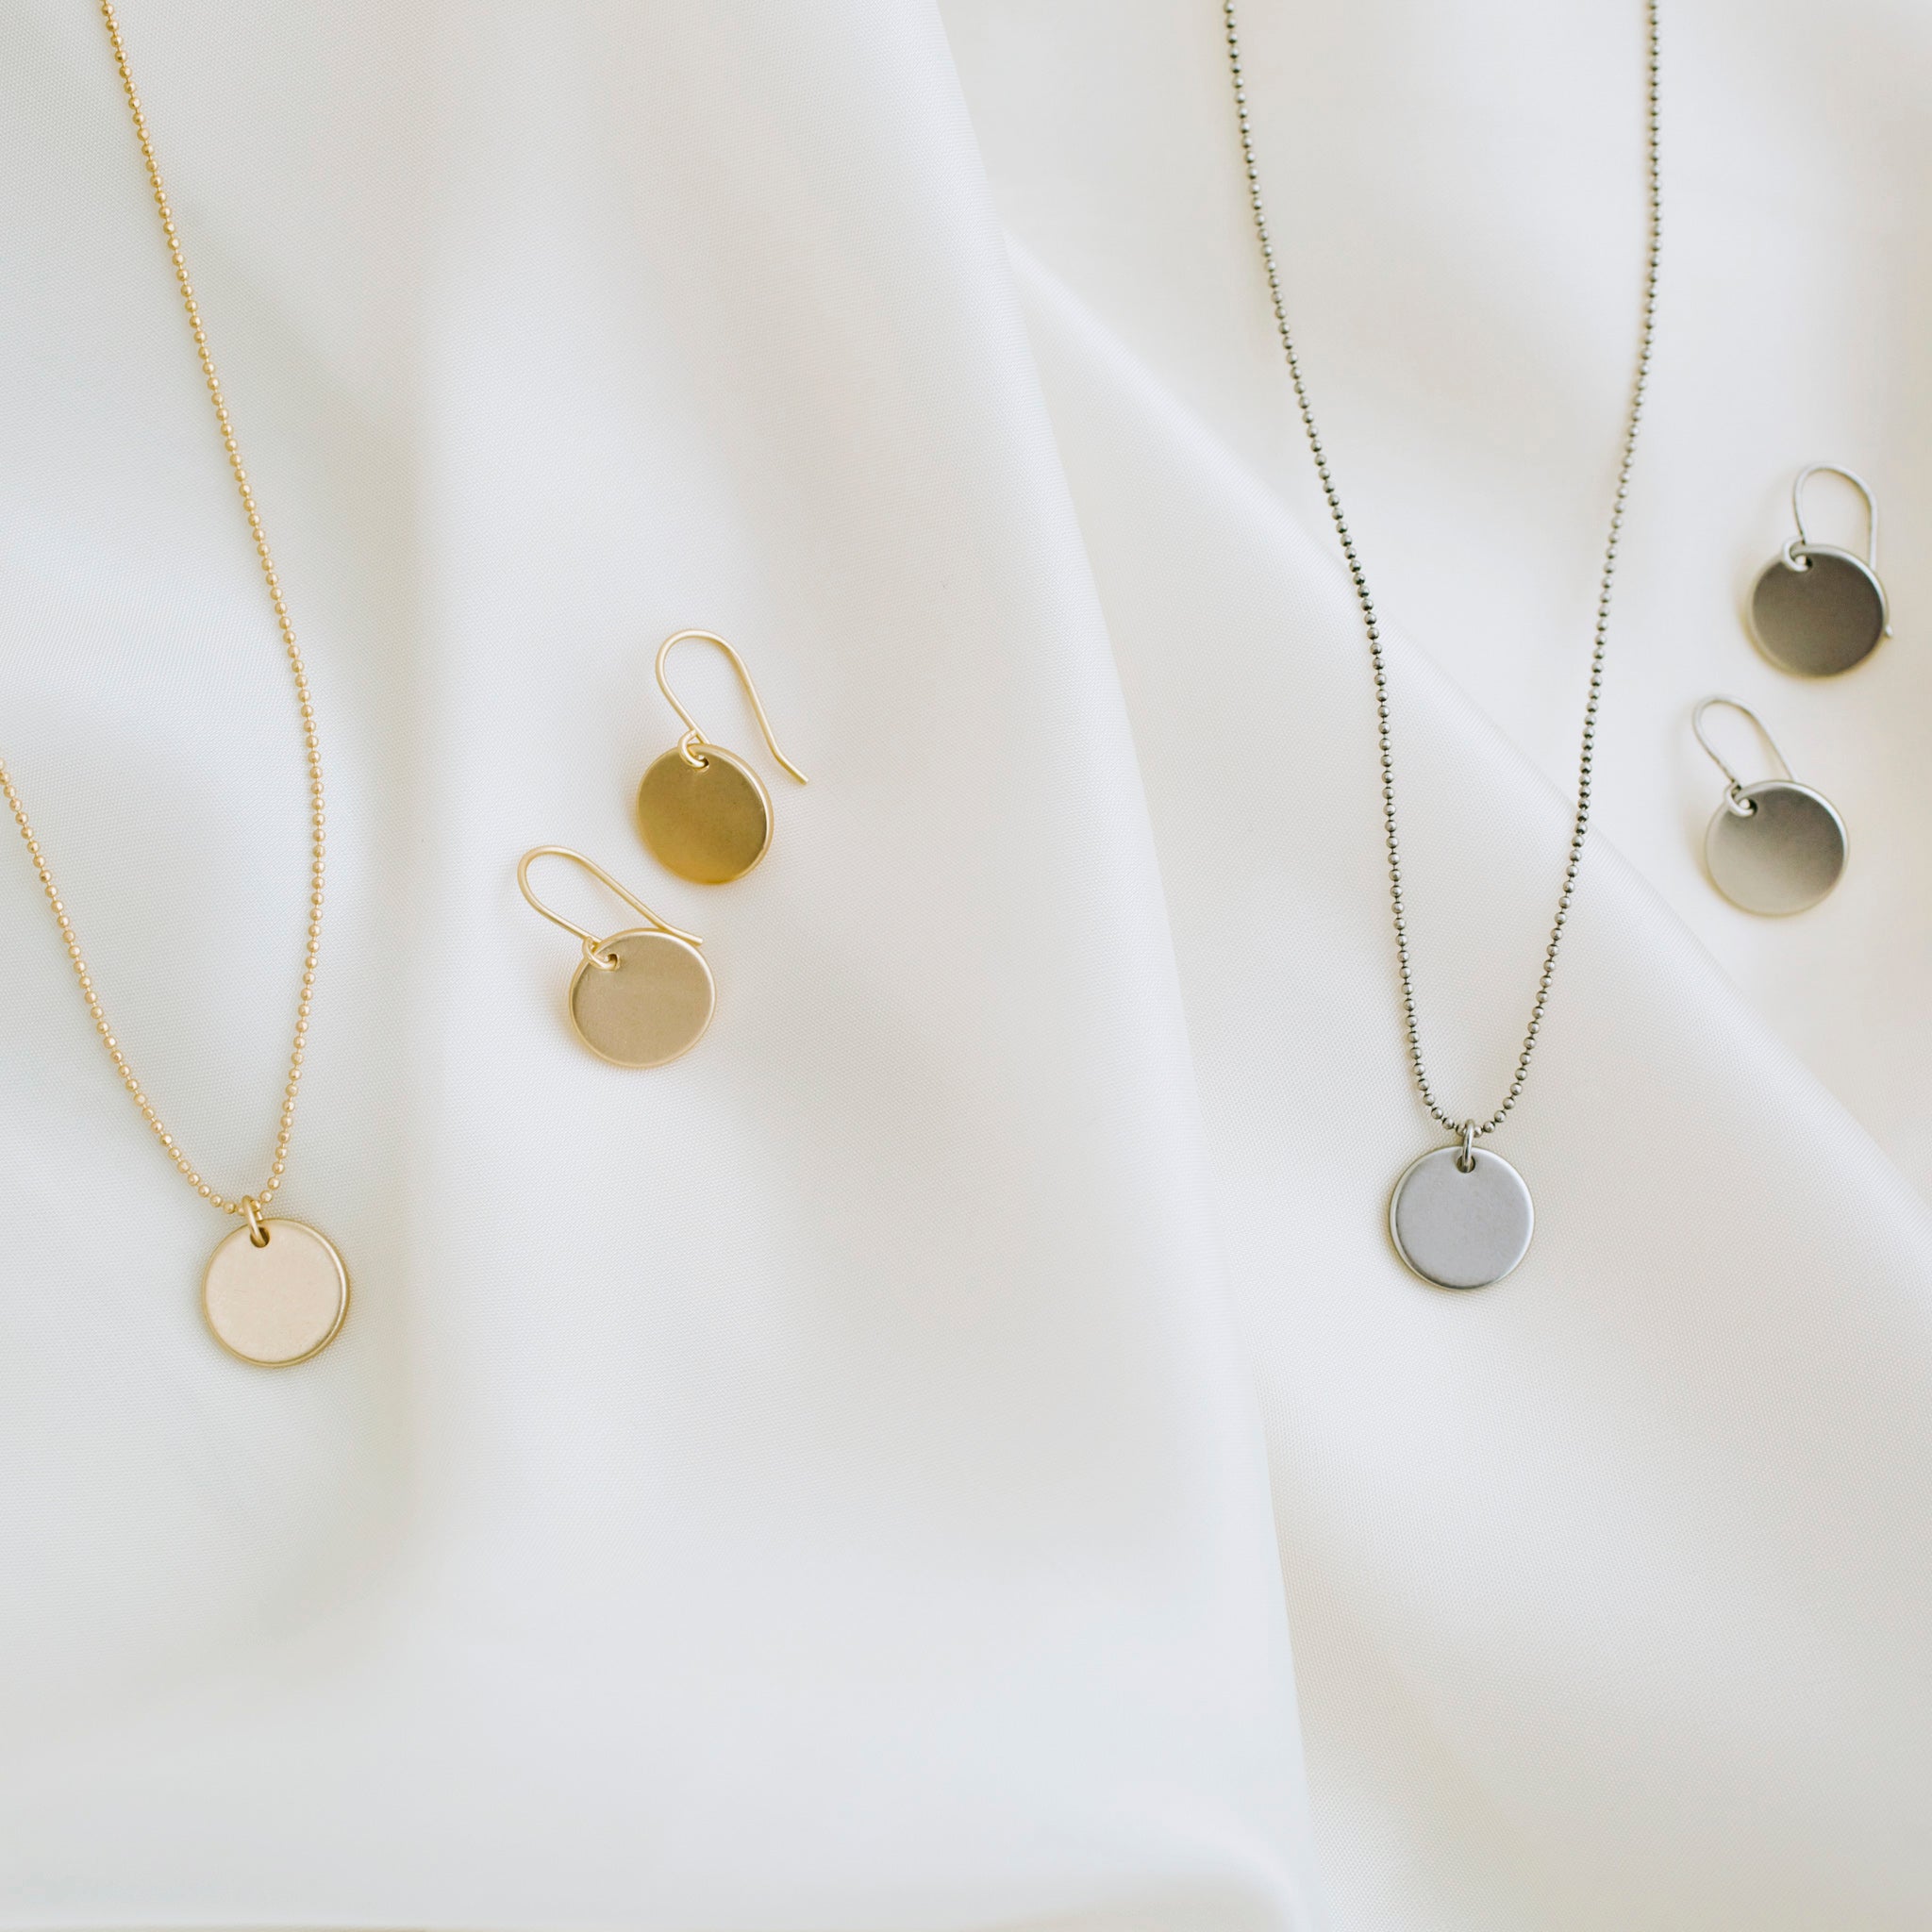 Elodie Necklace + Earrings Gift Set - Gold